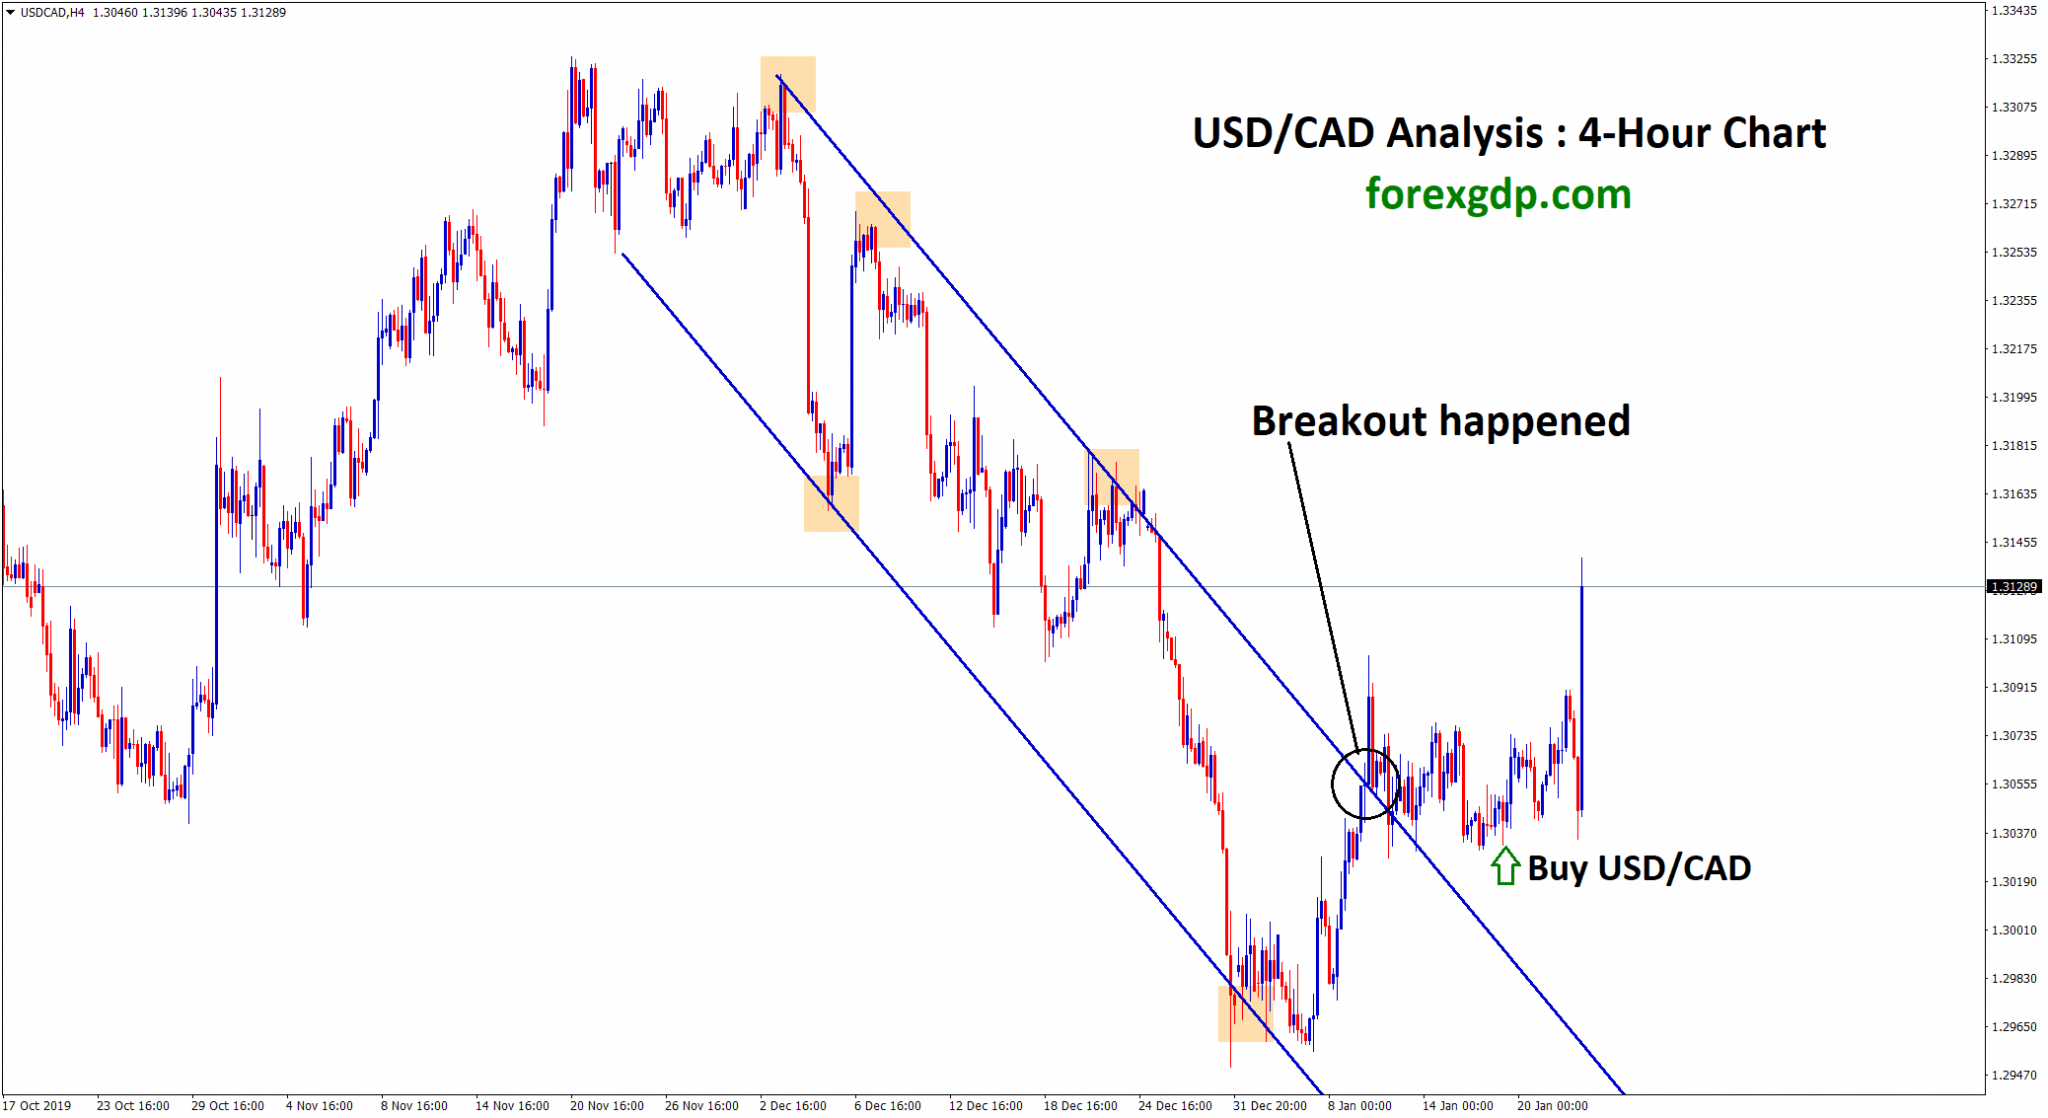 usd cad breakout happened at the top zone